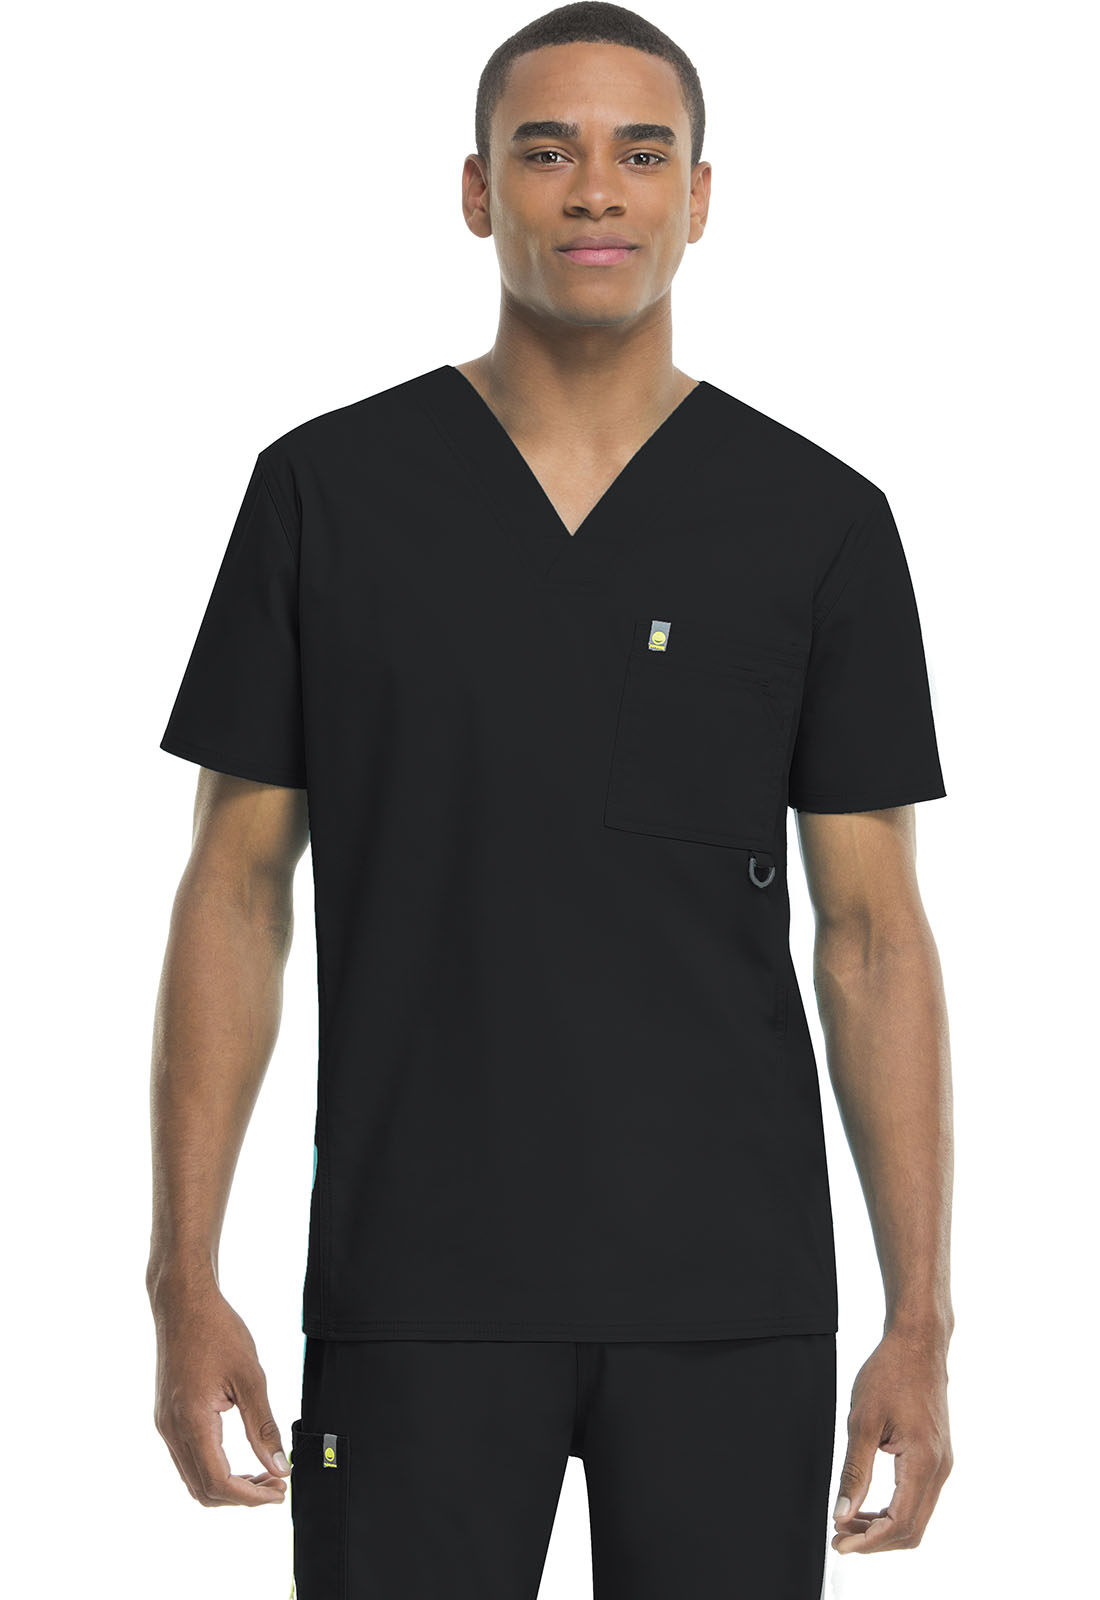 Code Happy Medical Mens Bliss w/ Certainty Mens V-Neck Top-Code Happy